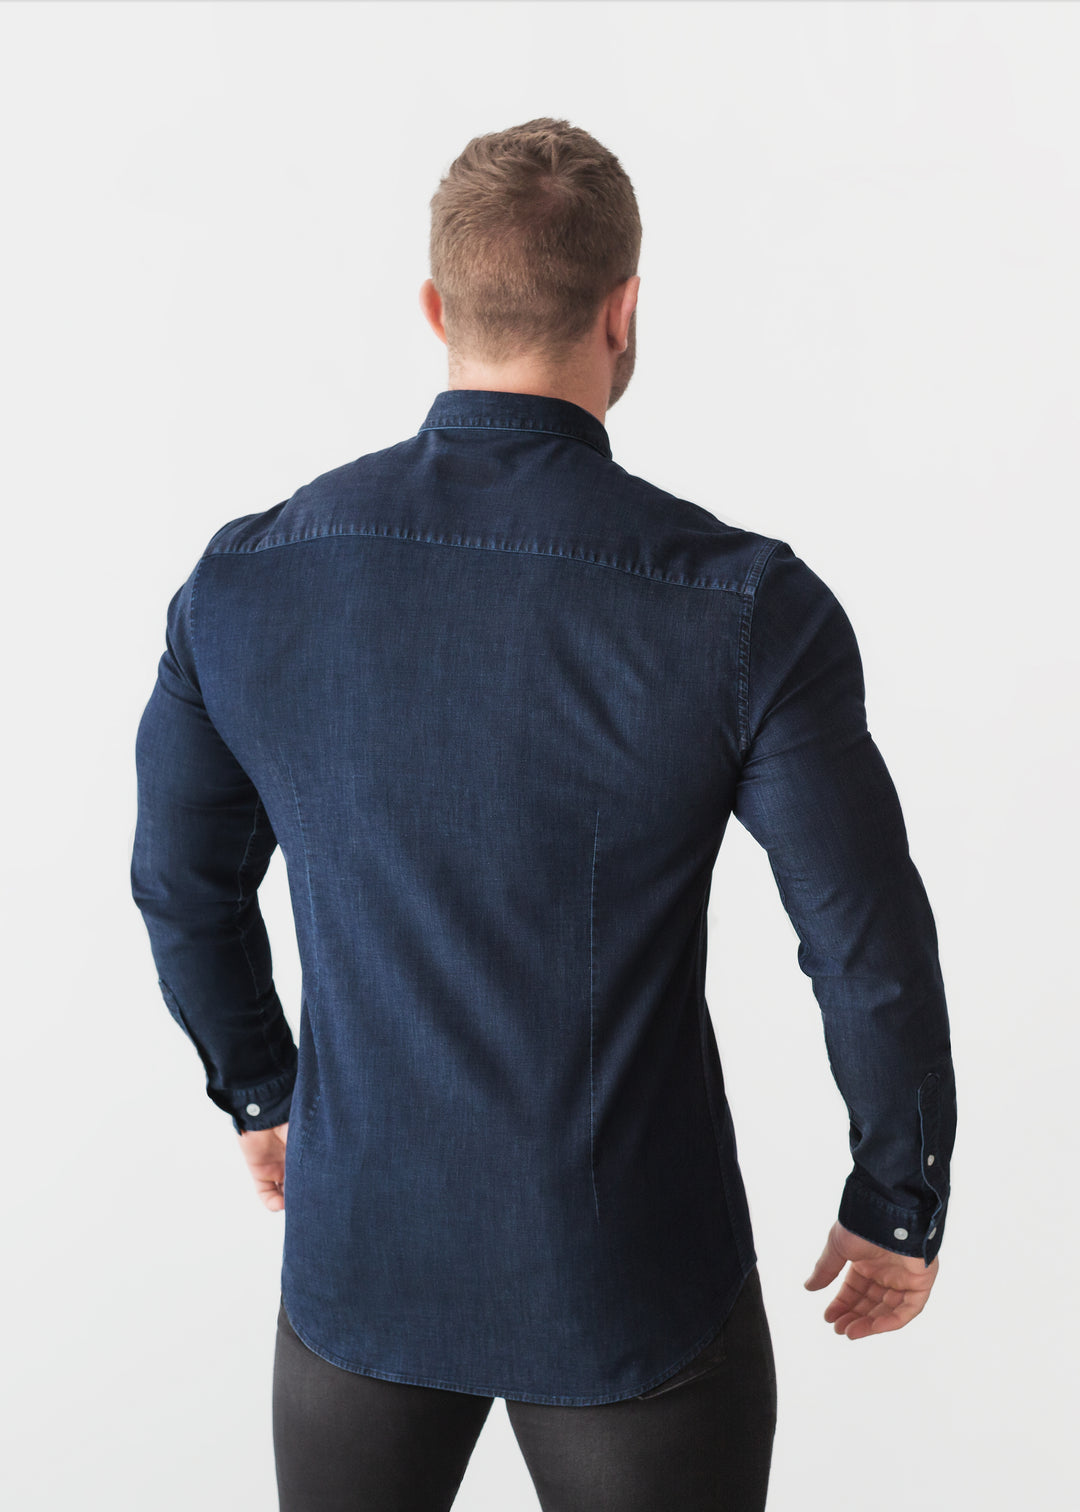 Dark Blue Denim Tapered Fit Shirt. A Proportionally Fitted and Comfortable Muscle Fit Shirt. Ideal for bodybuilders